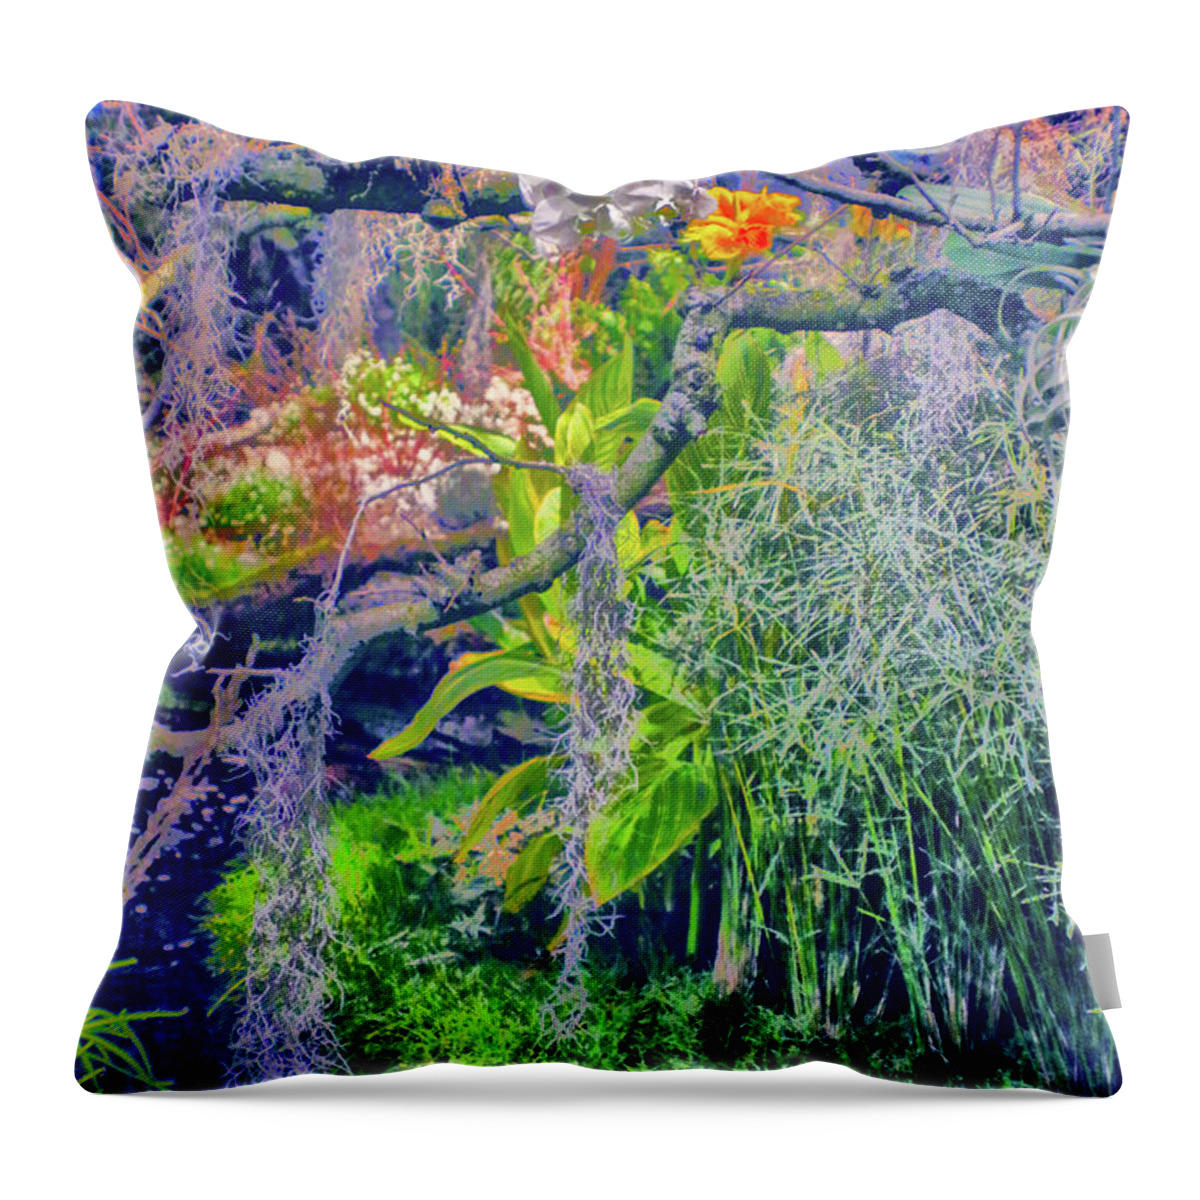 Lush Throw Pillow featuring the photograph Tropical Garden by Sandy Moulder